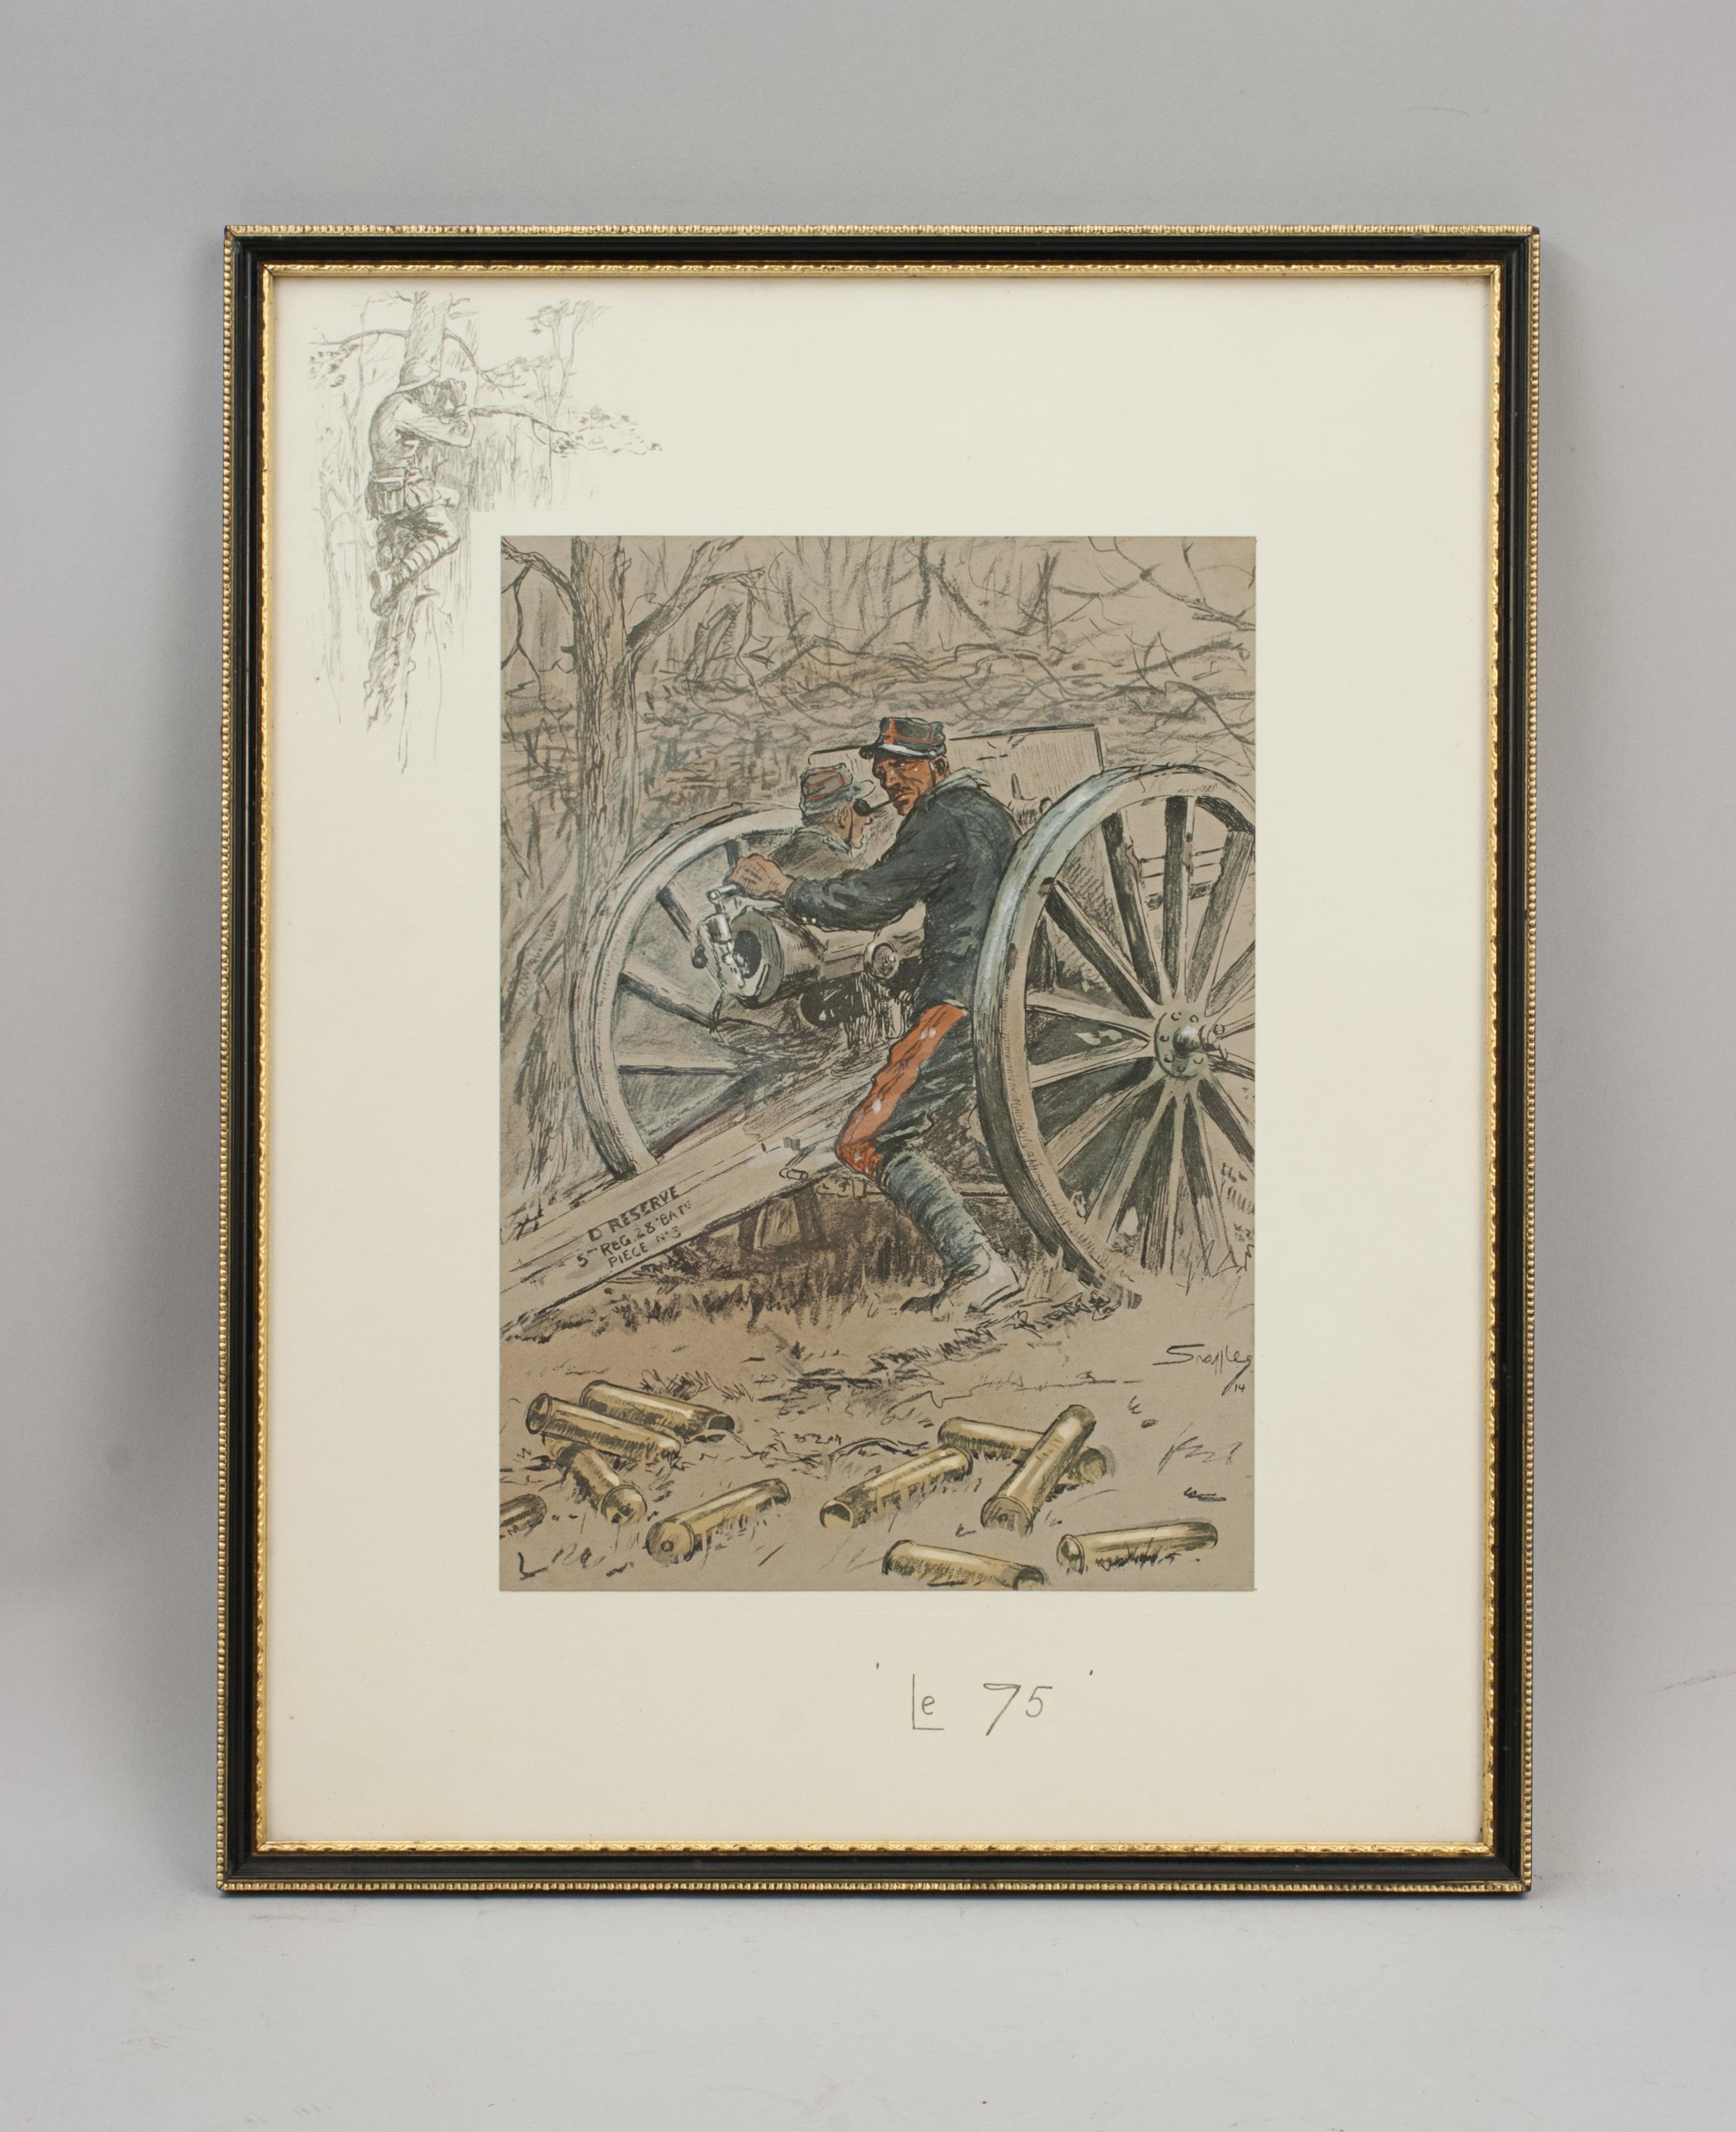 Sporting Art Snaffles WW1 Military Lithograph, 'le 75' Military Print. For Sale